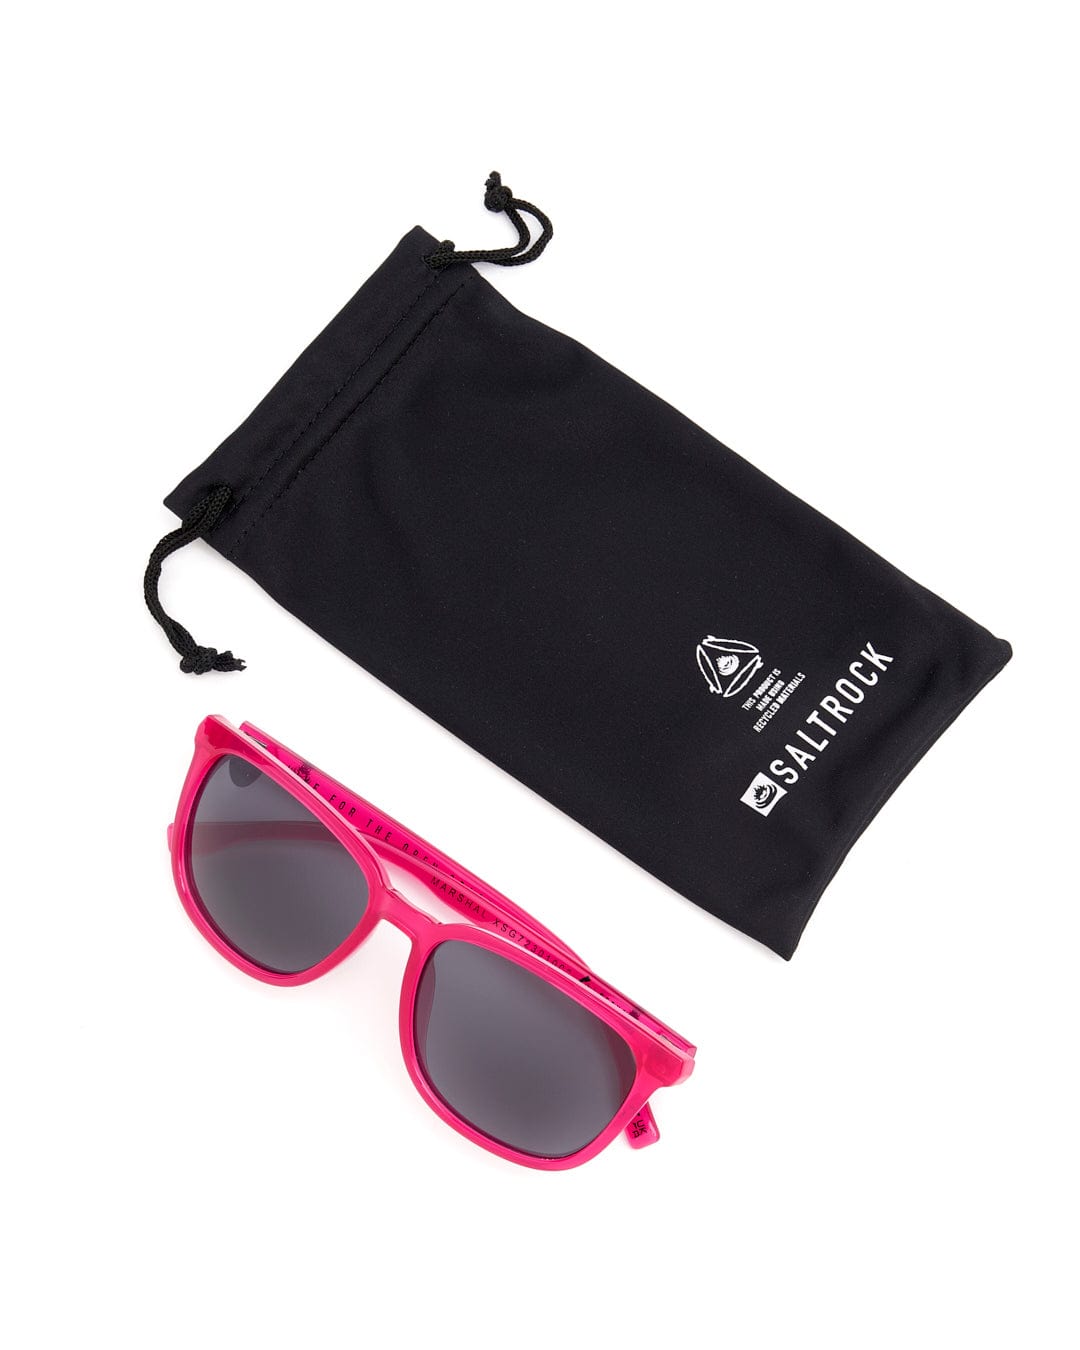 A pair of Saltrock Marshall - Recycled Polarised Sunglasses - Pink with UV protection and a black pouch.